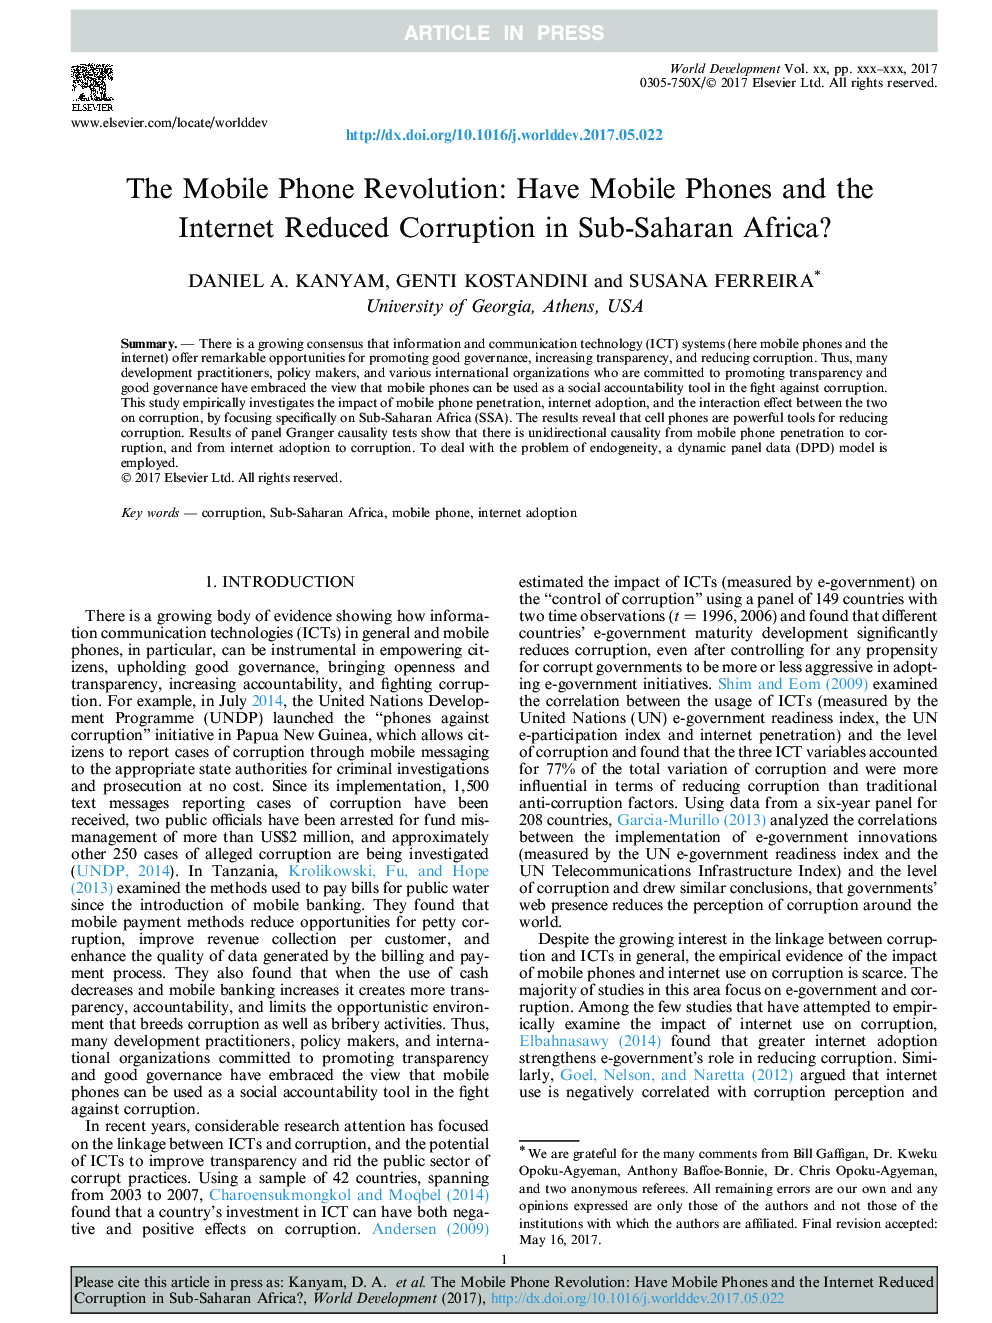 The Mobile Phone Revolution: Have Mobile Phones and the Internet Reduced Corruption in Sub-Saharan Africa?